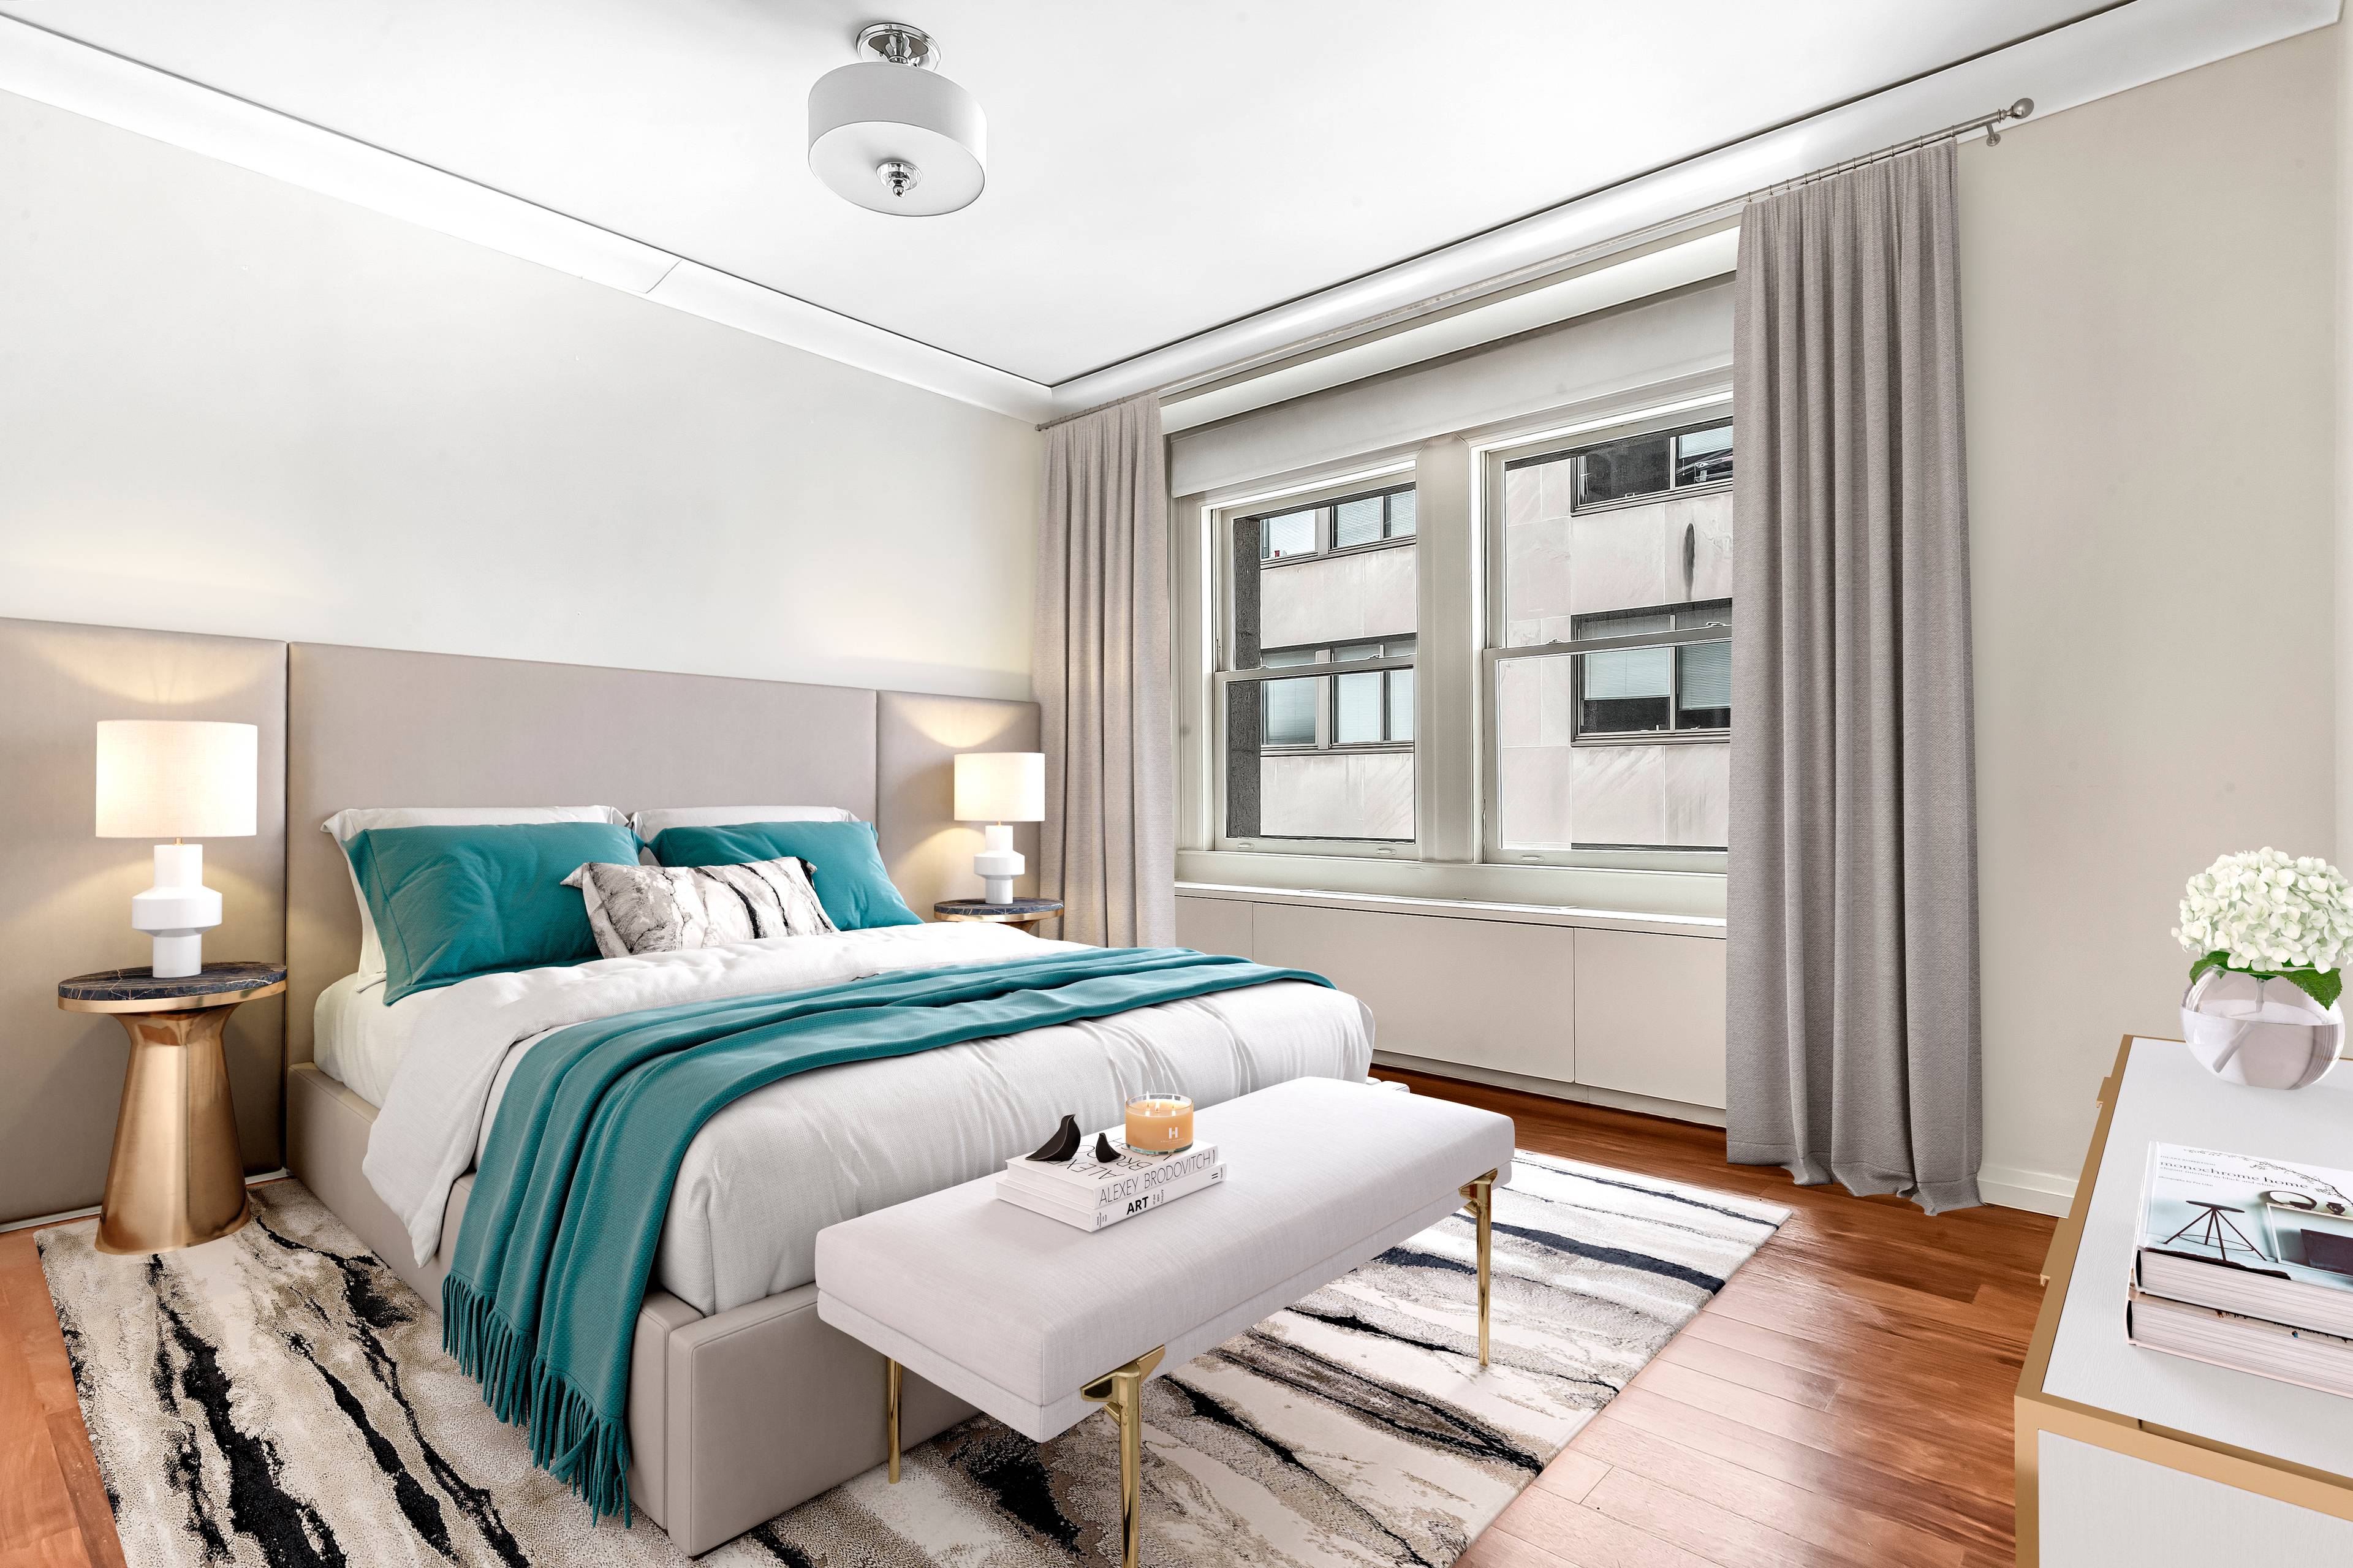 LOWEST PPSF 2 Bed 2 Bath CONDO IN FIDI AT 735 PSF Tenant in Place through August 2022 Paying 6, 700 Per Month Flawless corner 2 Bed 2 Bath in ...